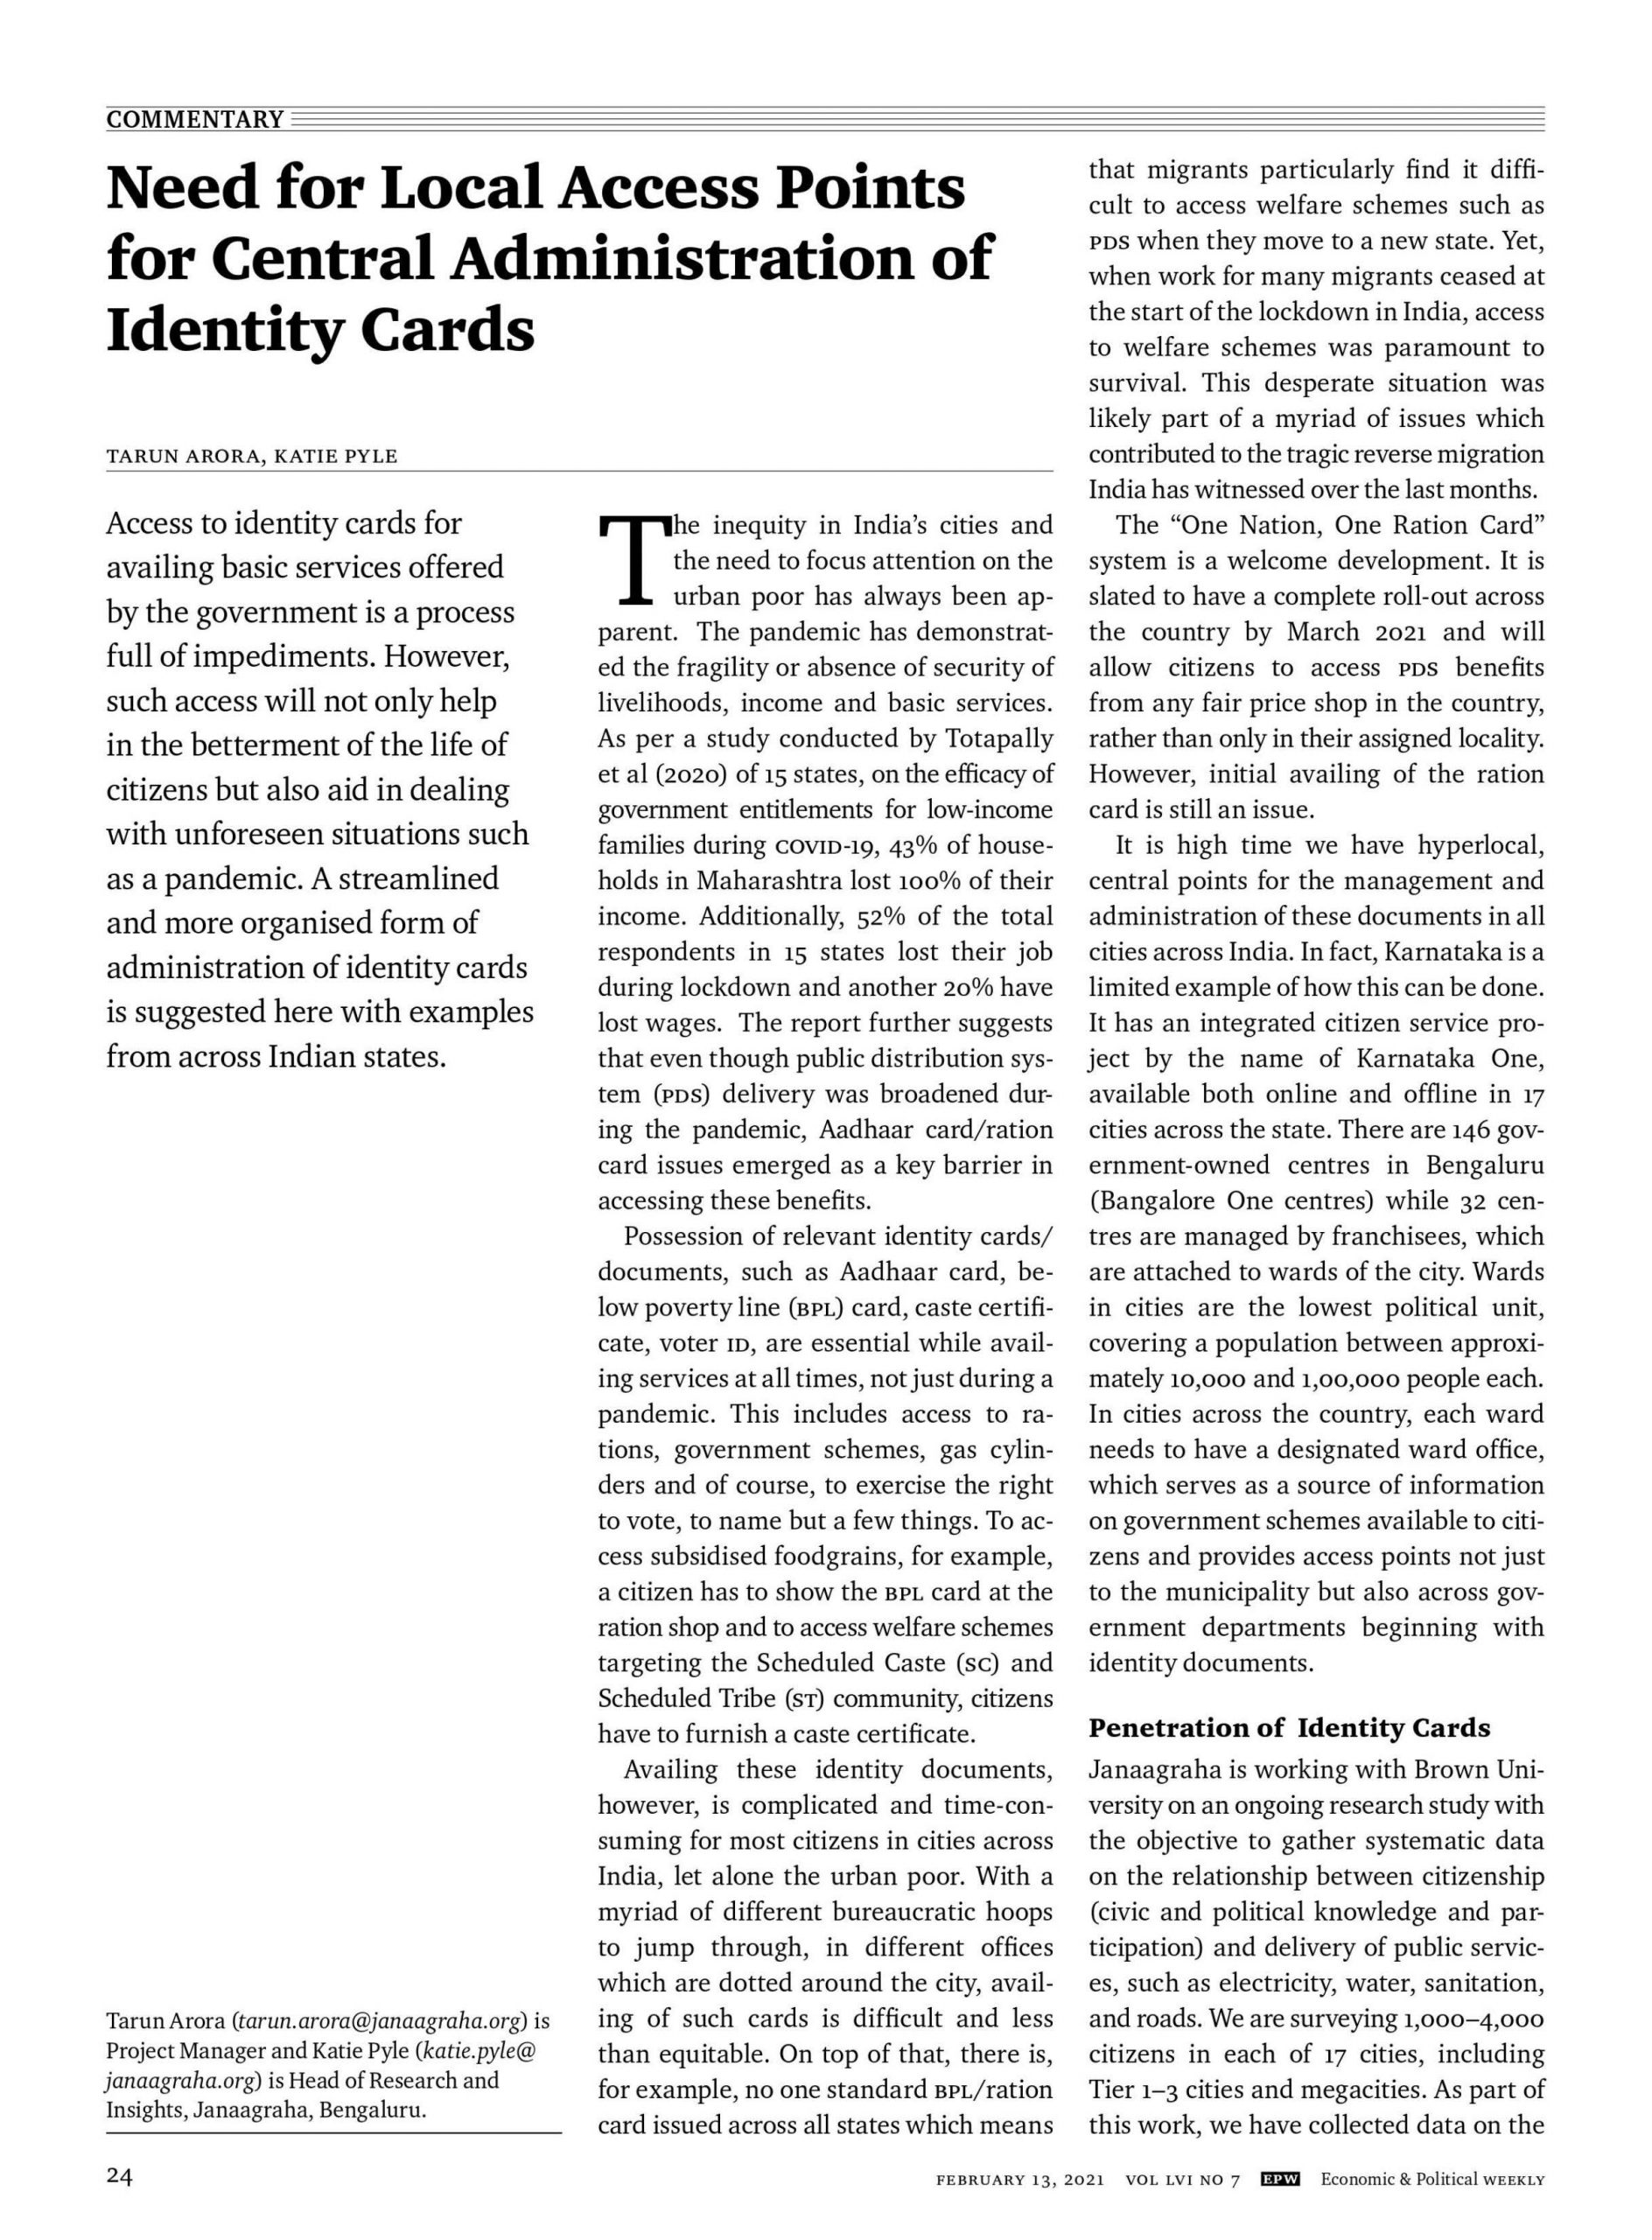 Need for Local Access Points for Central Administration of Identity Cards